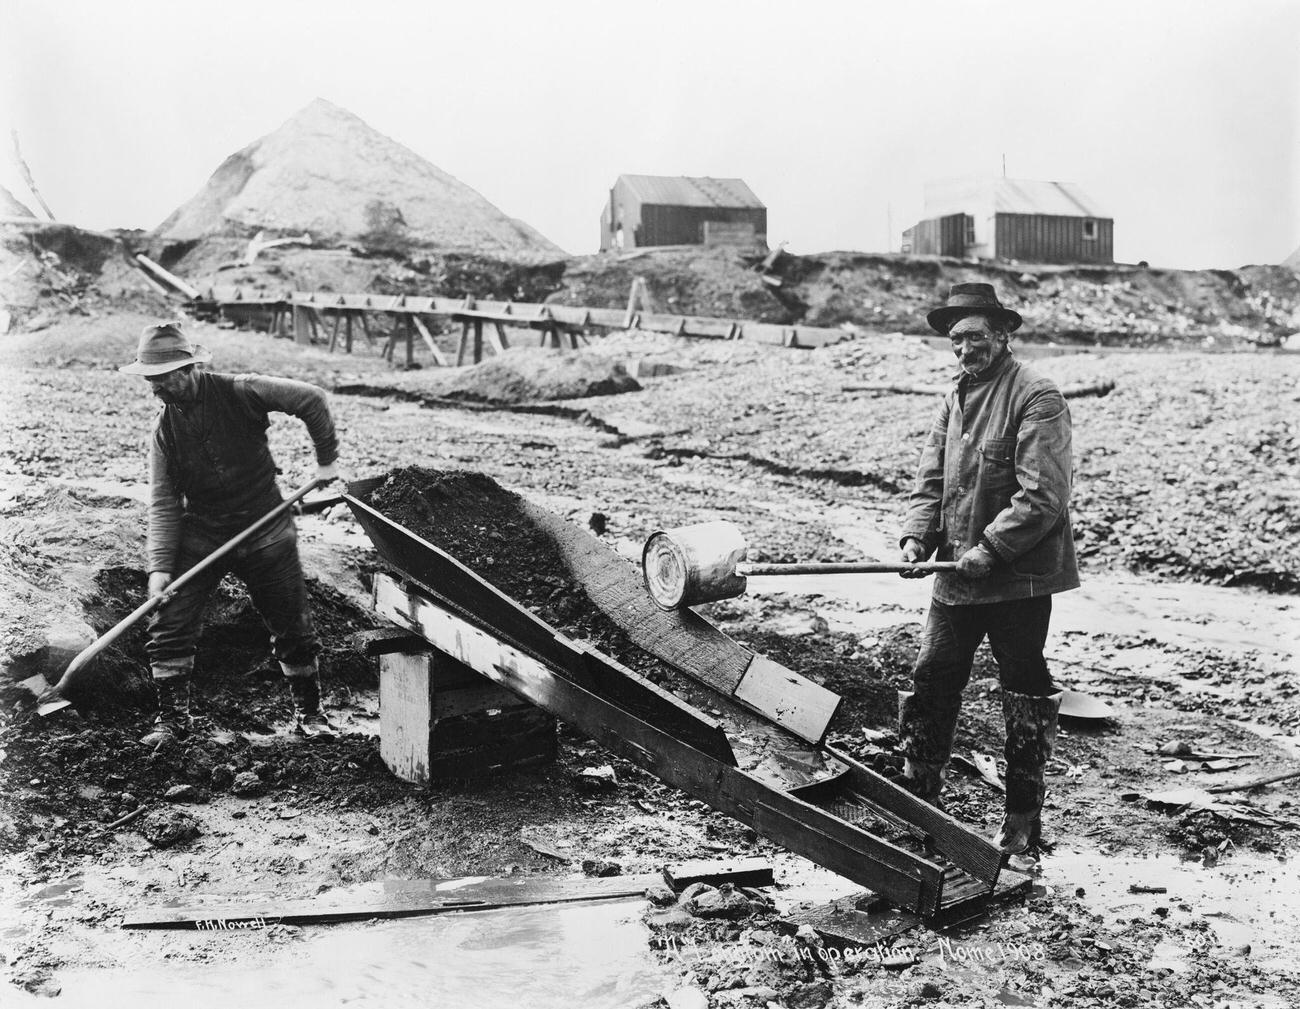 Long Tom in operation in Nome, Alaska, during the Klondike Gold Rush, 1908.